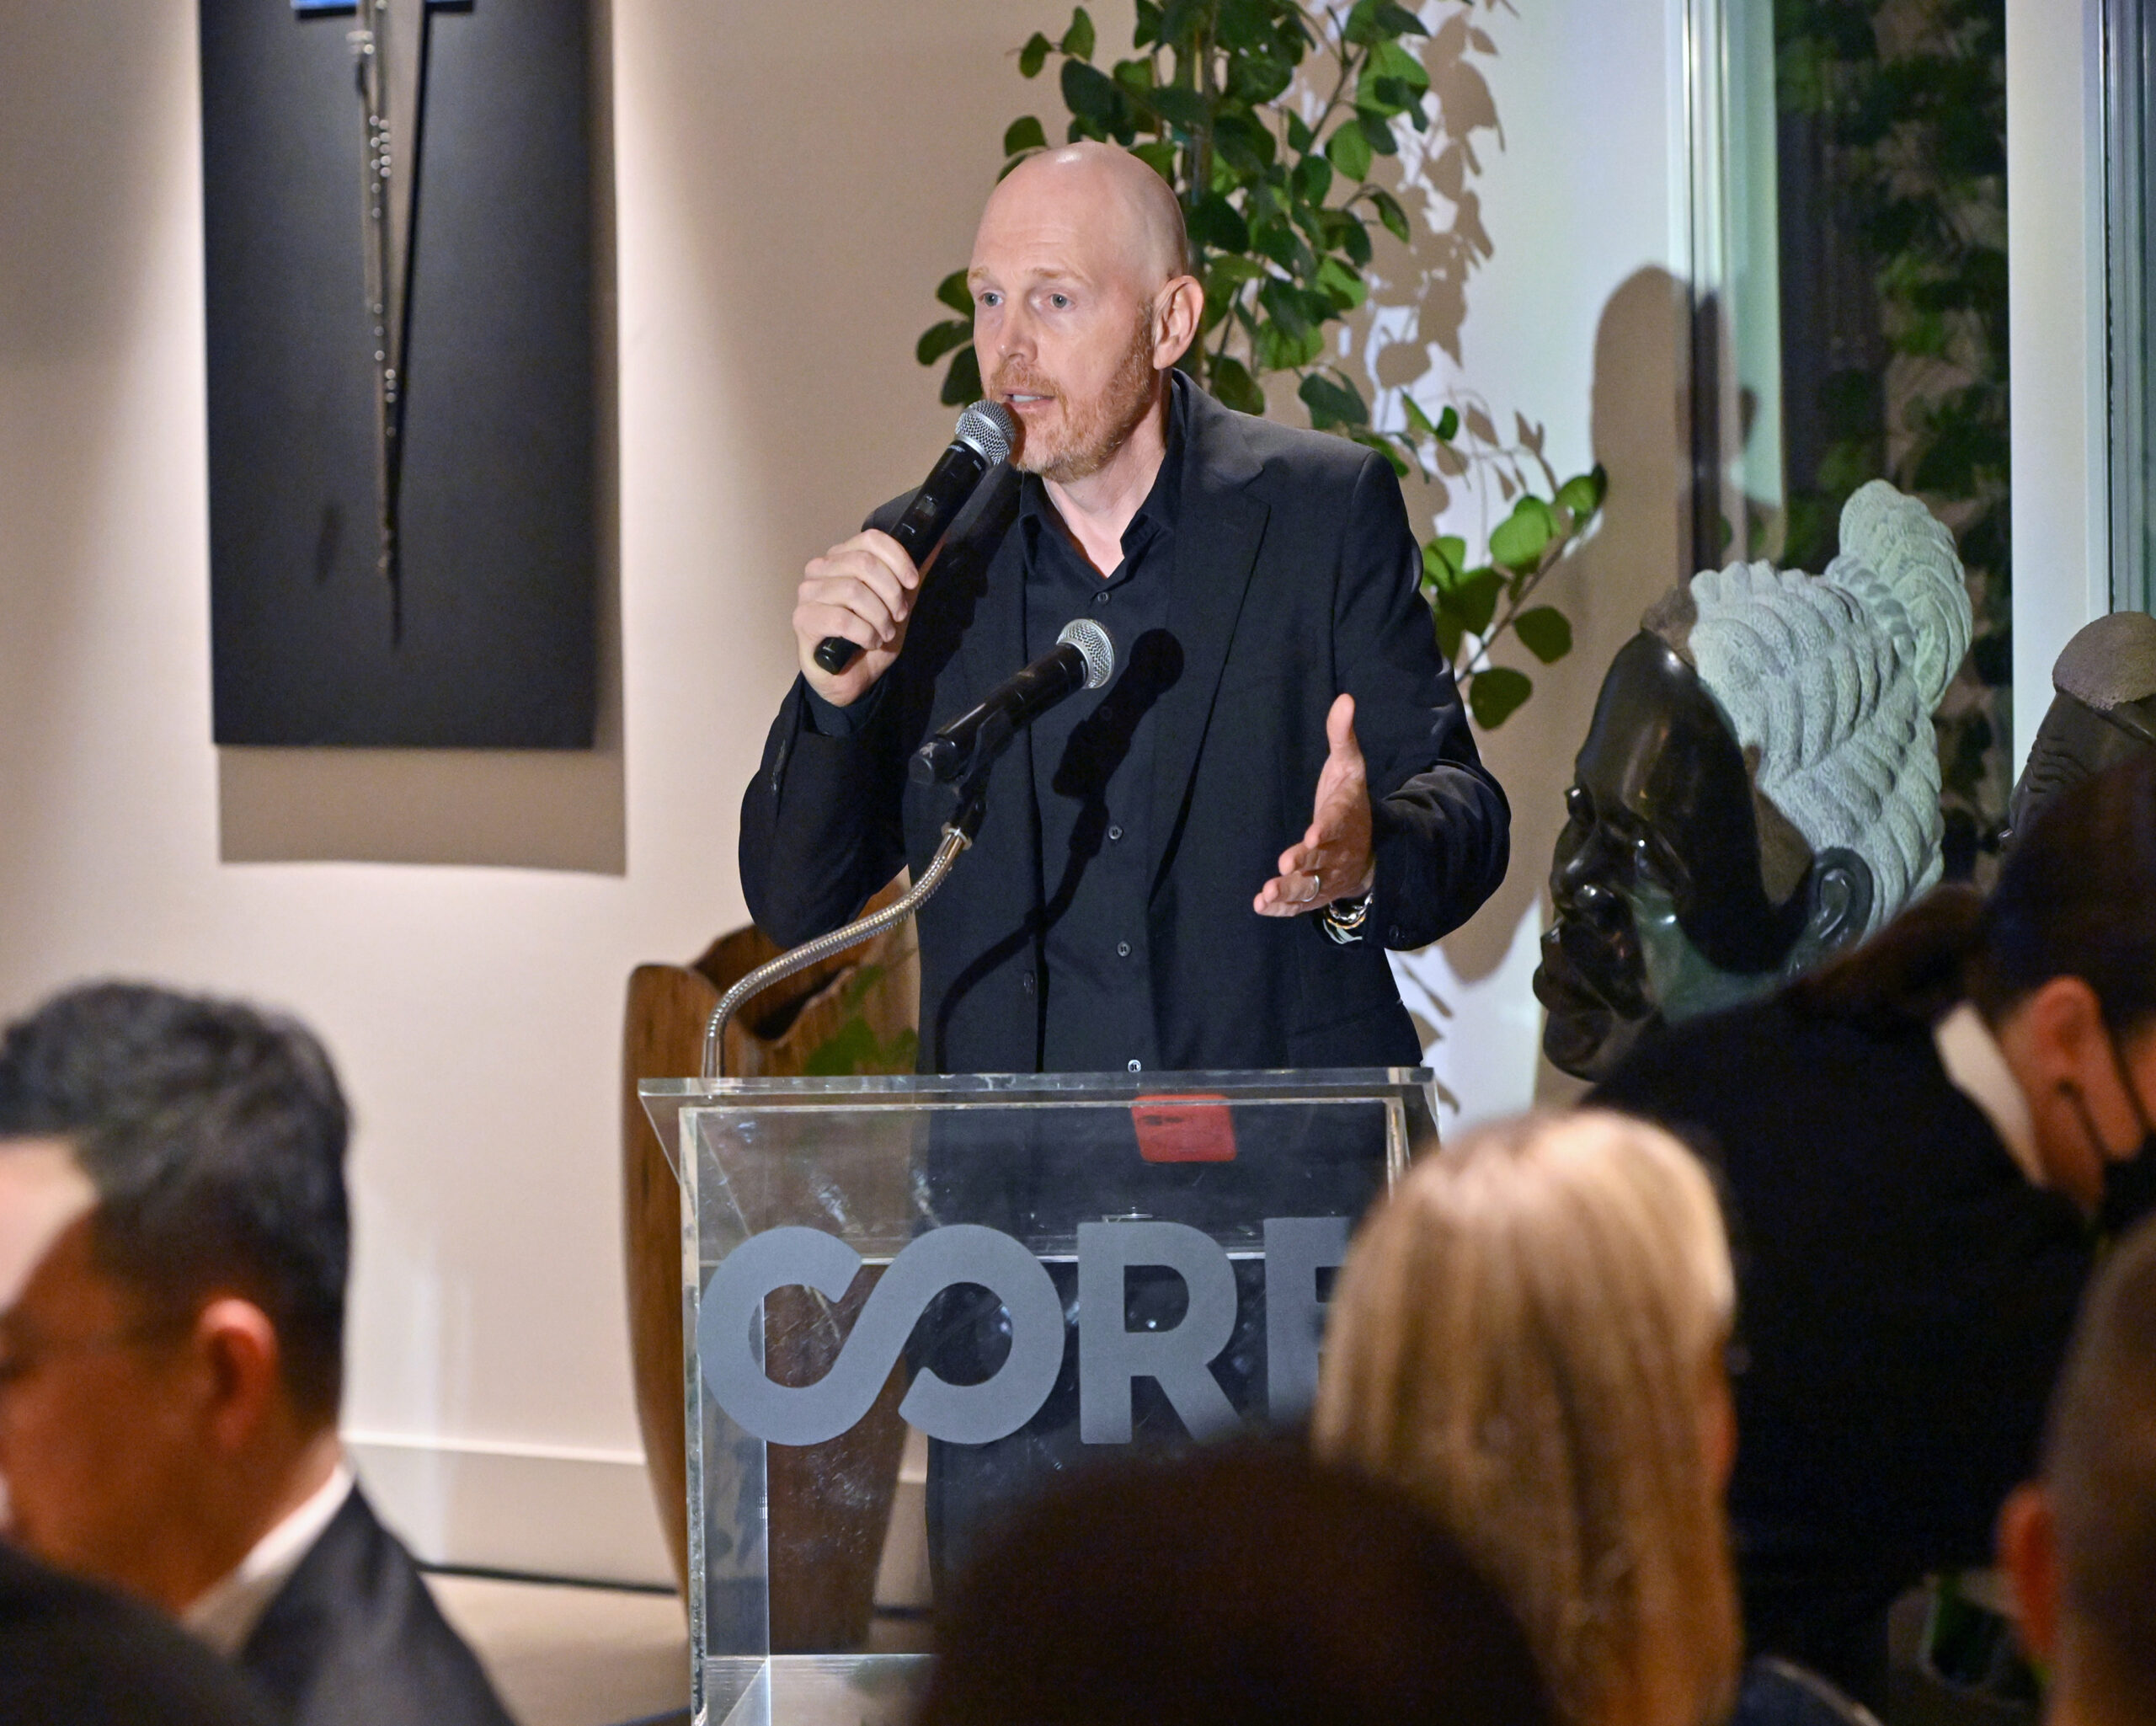 Comedian Bill Burr as master of ceremony for the benefit dinner.